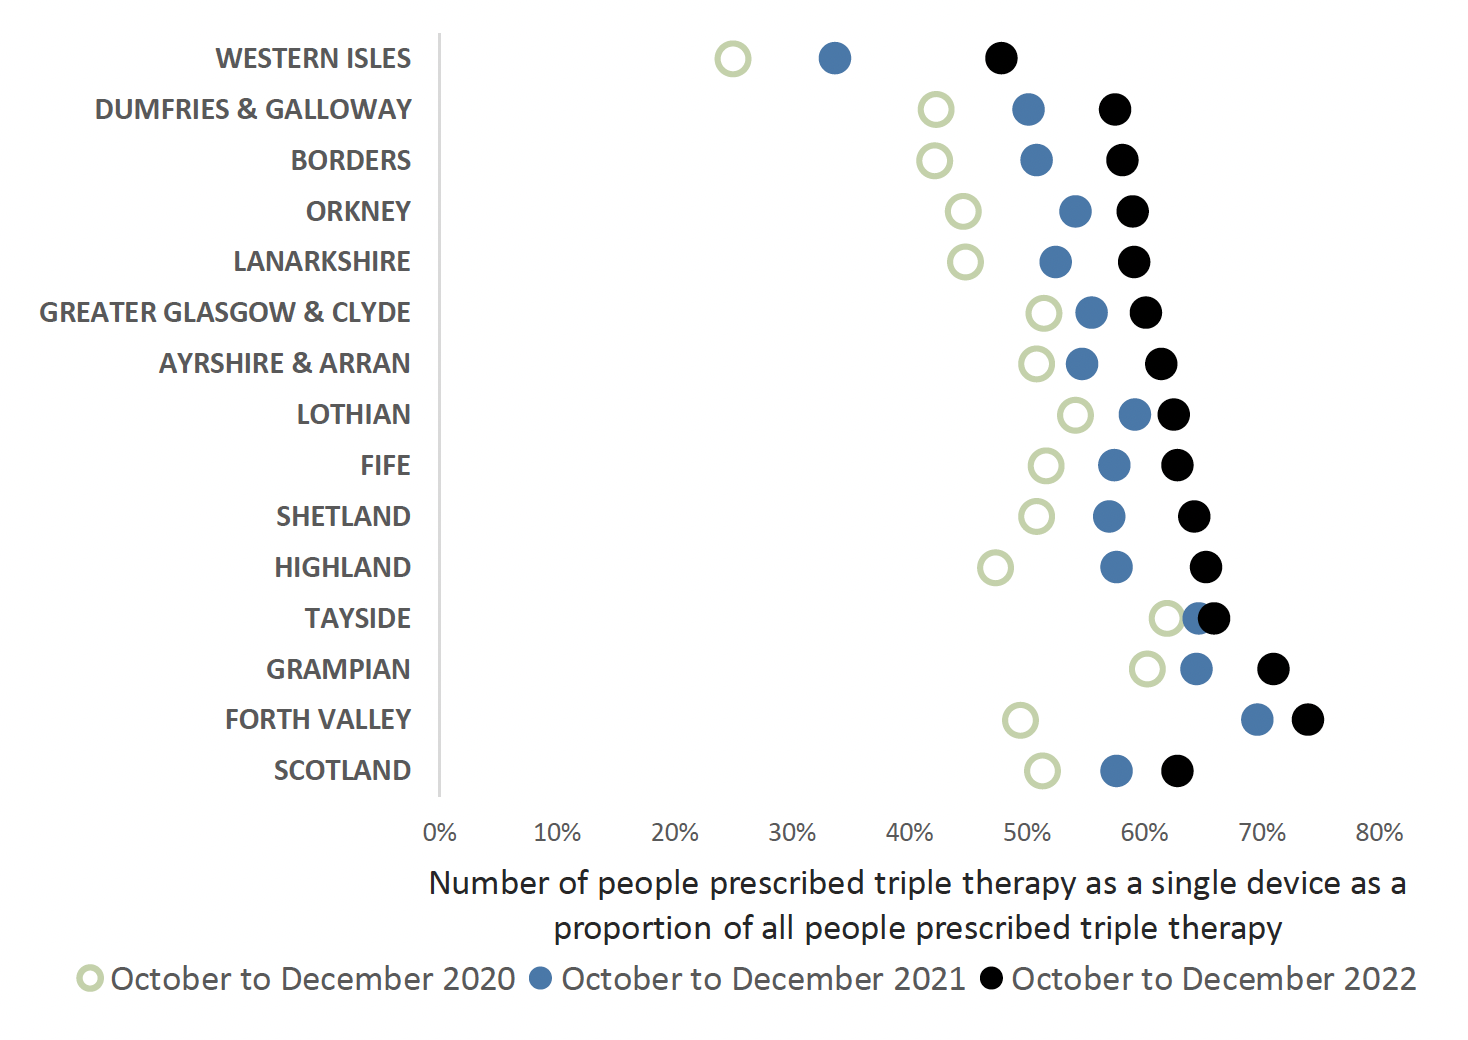 Chart showing variance of people prescribed triple therapy as a single device compared to all people prescribed triple therapy across all health boards and Scotland from 2020 to 2022. Overall Scotland trend is increasing